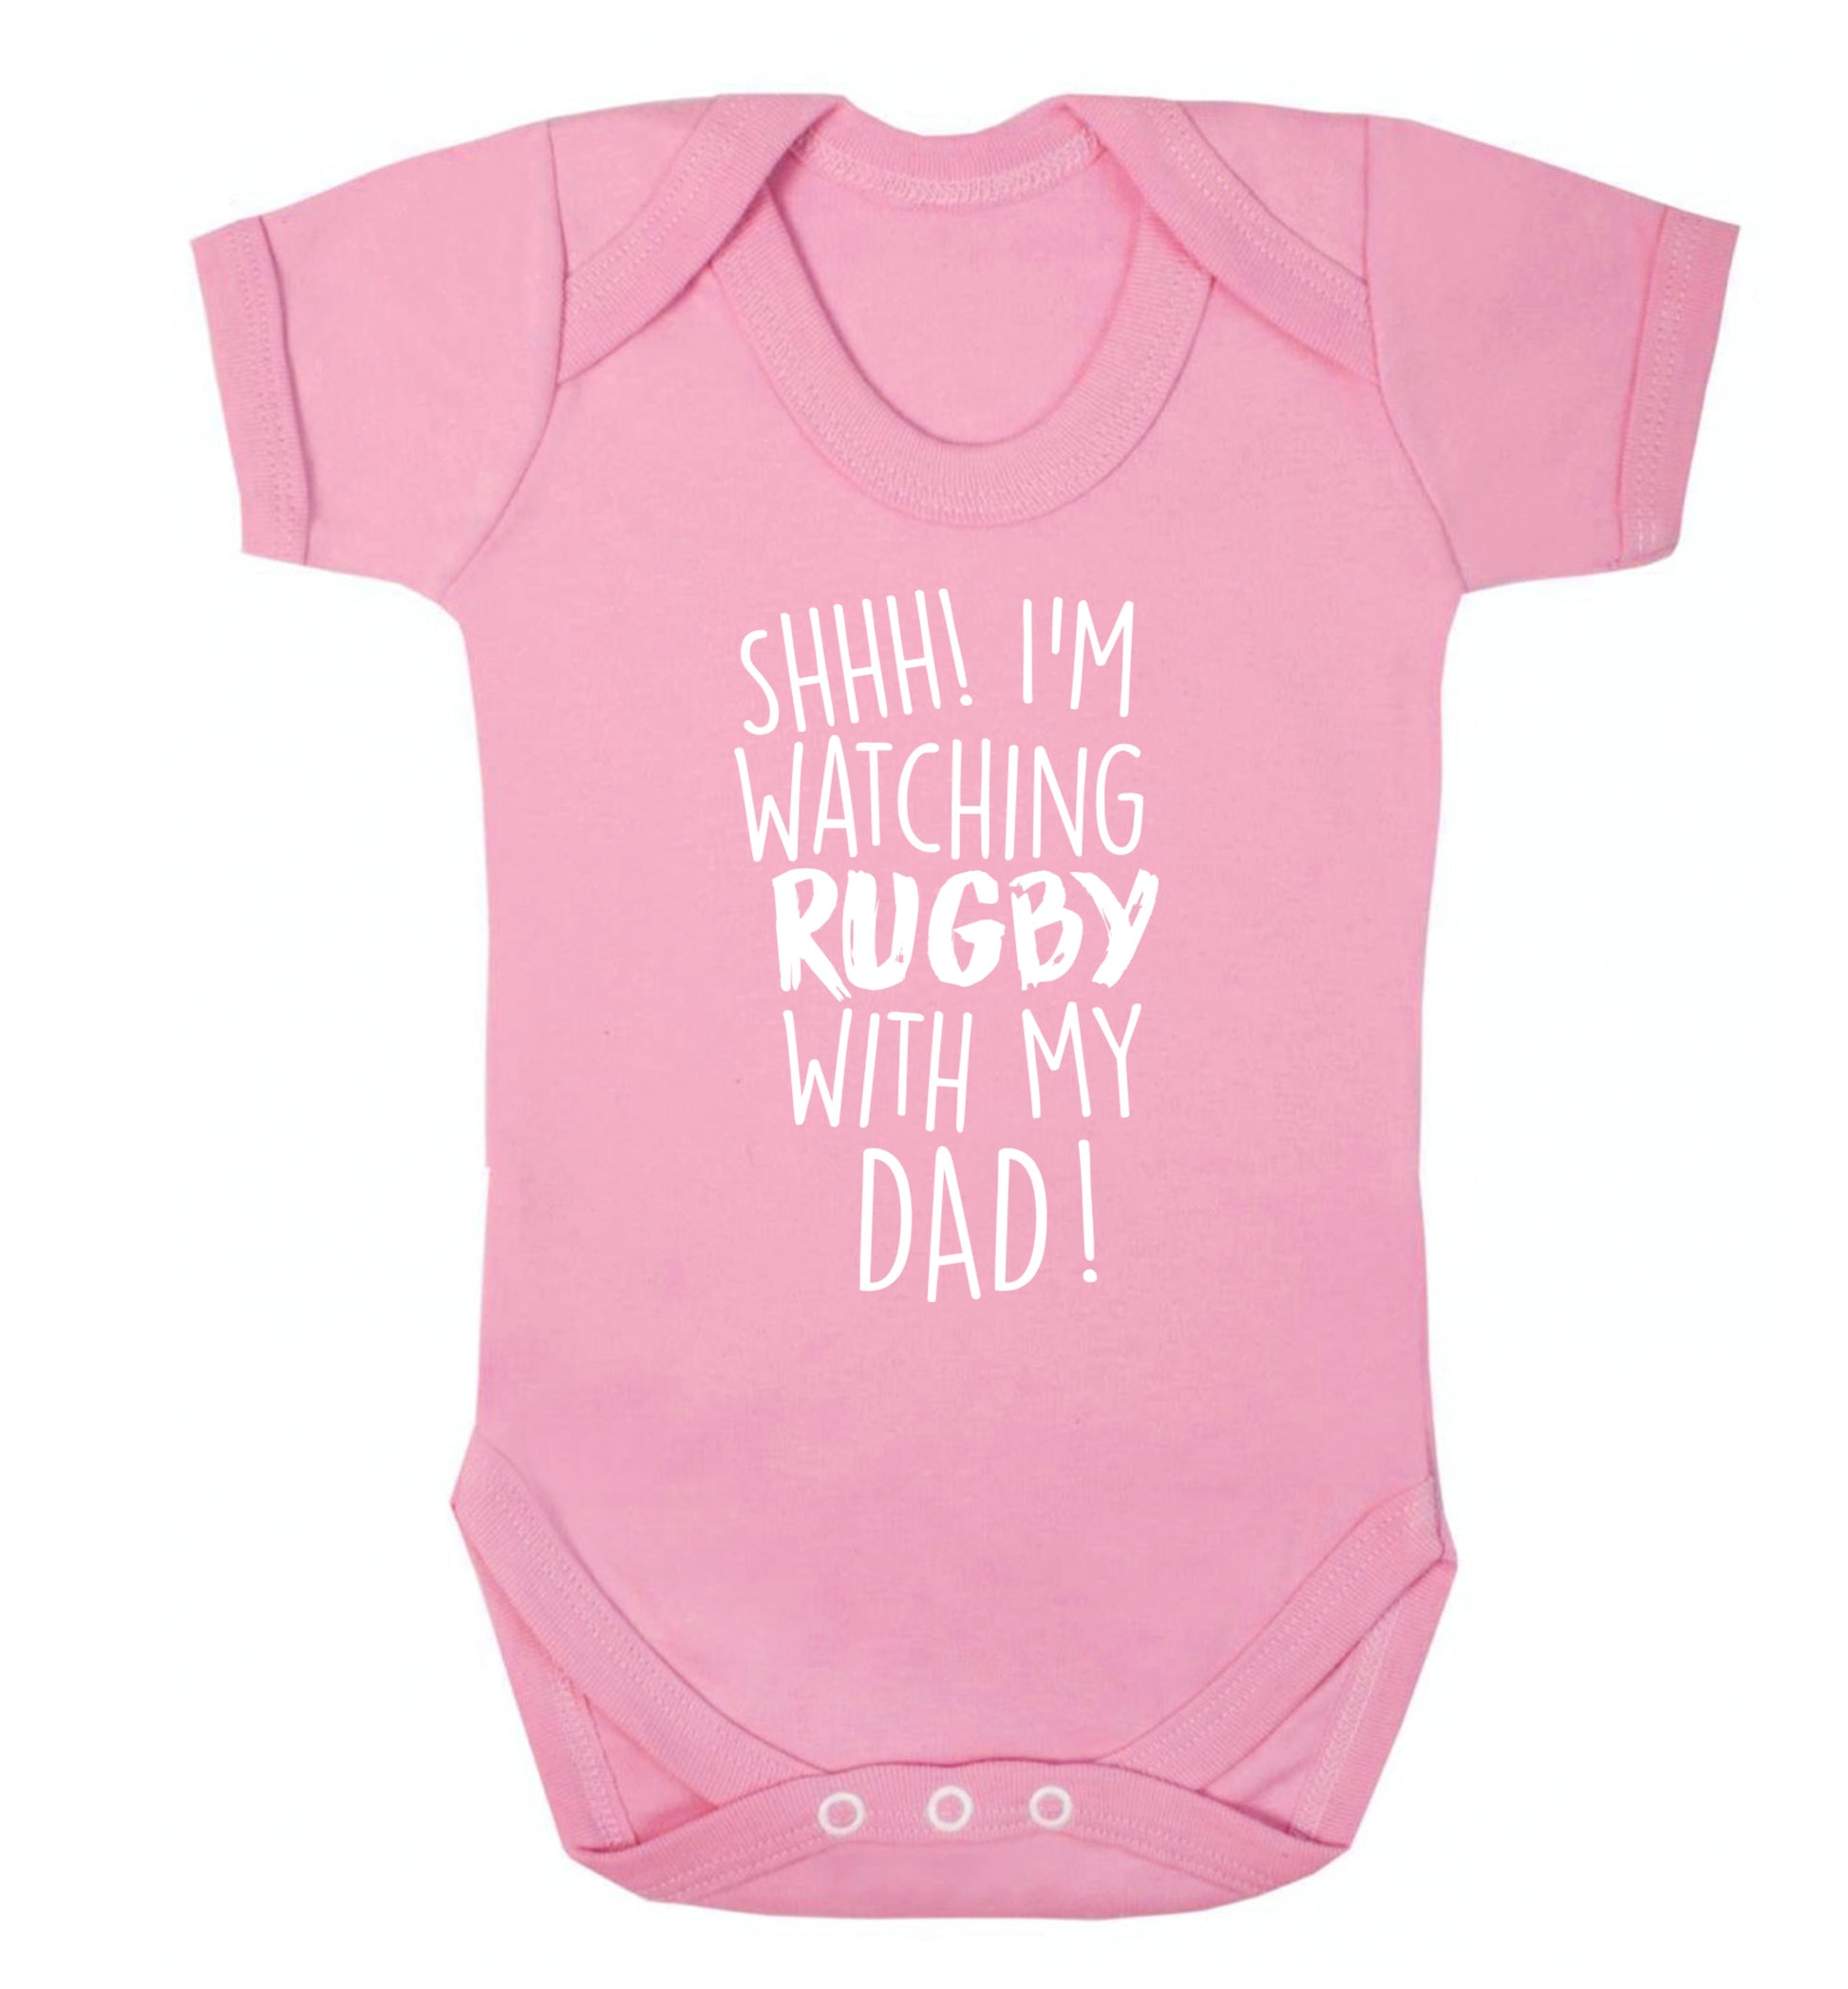 Shh... I'm watching rugby with my dad Baby Vest pale pink 18-24 months